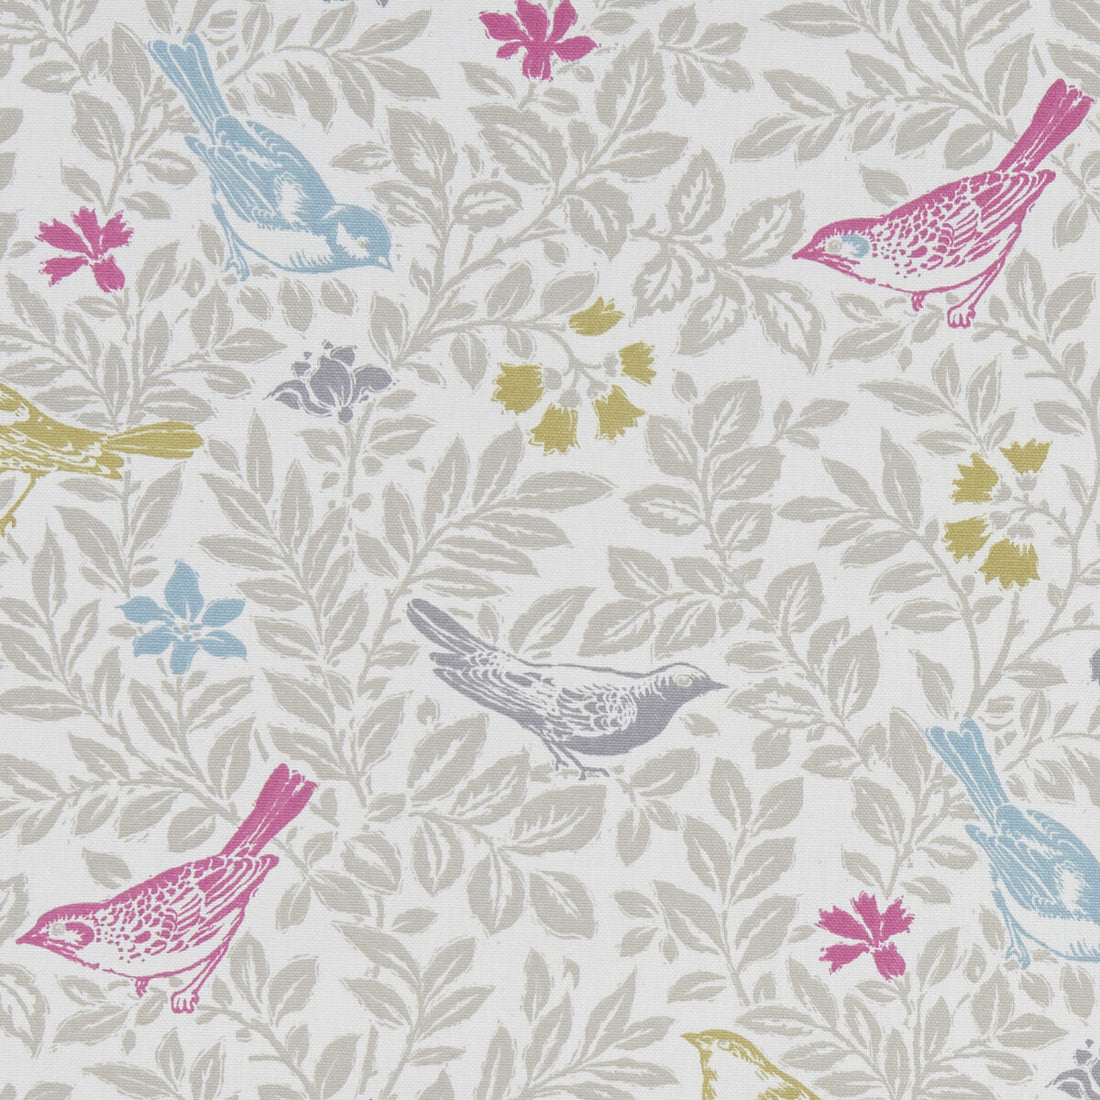 Bird Song fabric in summer color - pattern F1184/03.CAC.0 - by Clarke And Clarke in the Land &amp; Sea By Studio G For C&amp;C collection